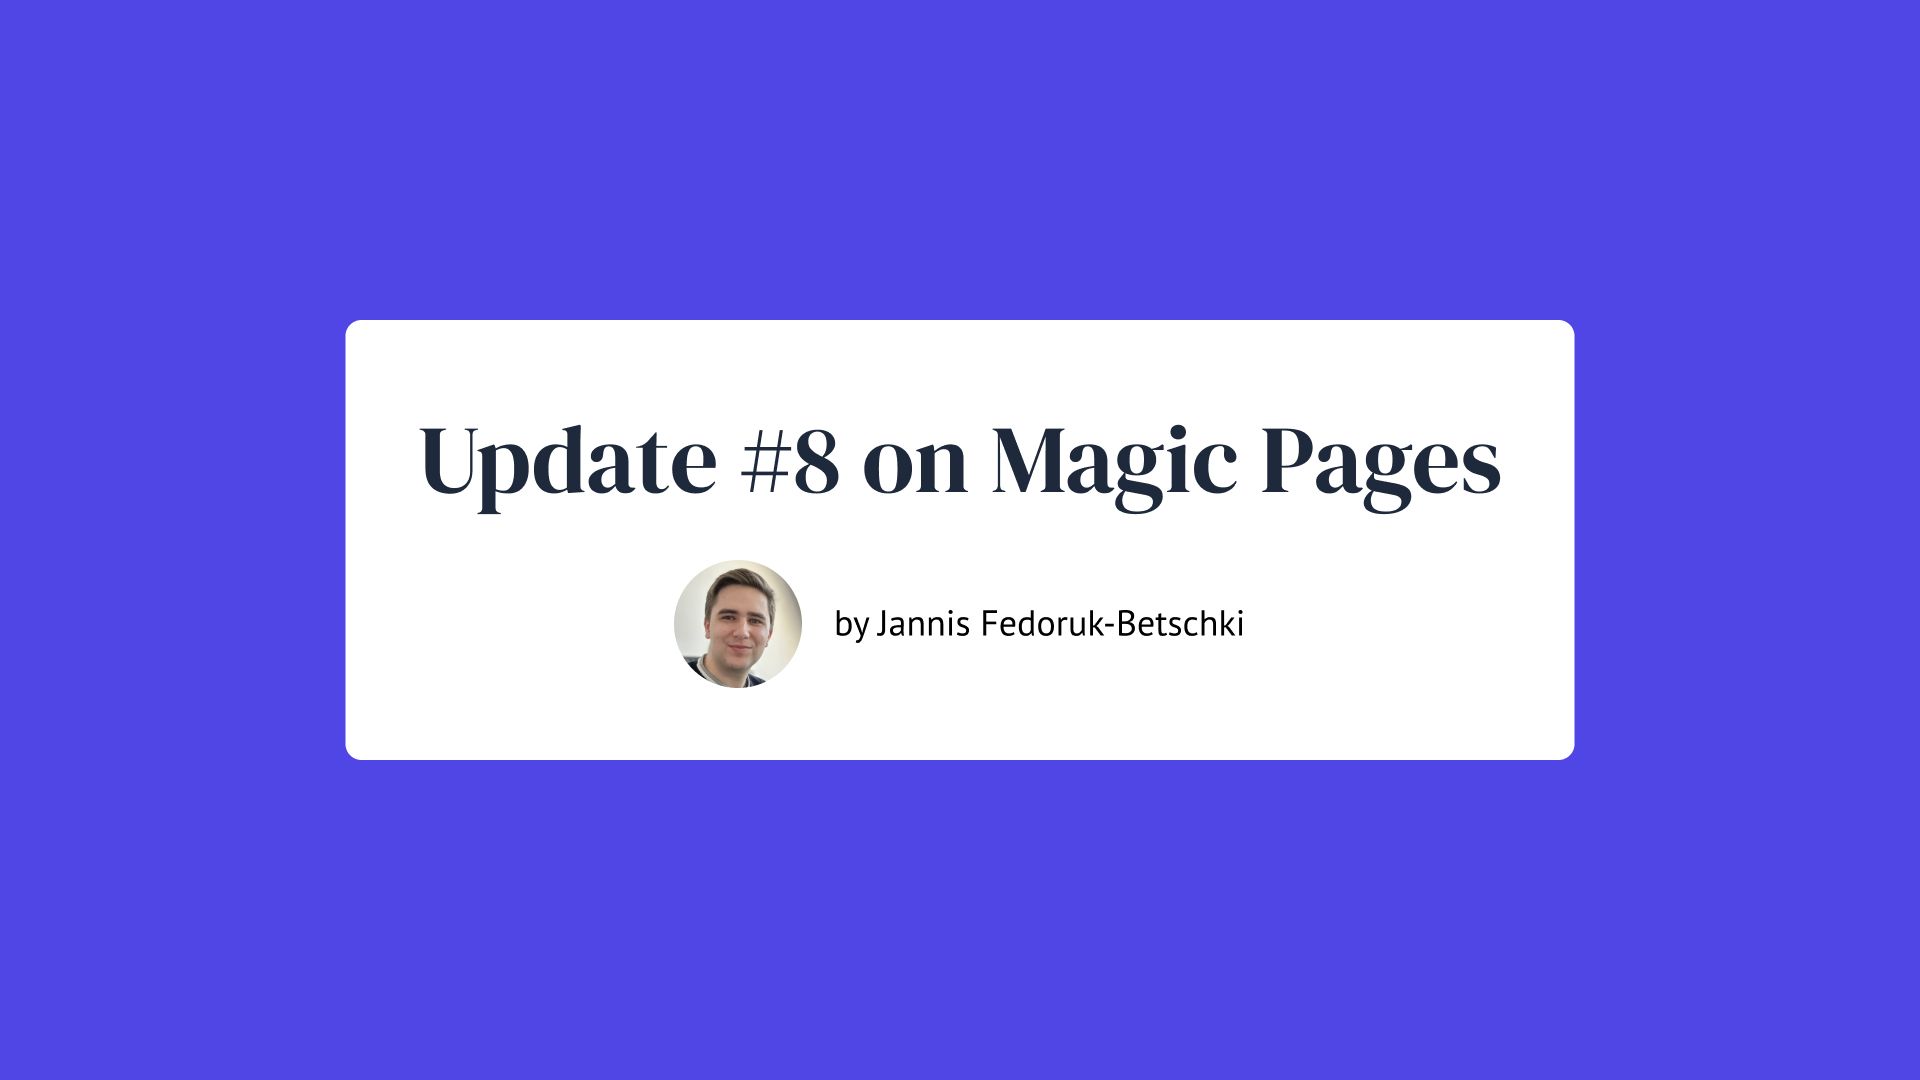 Update #8 on Magic Pages by Jannis Fedoruk-Betschki